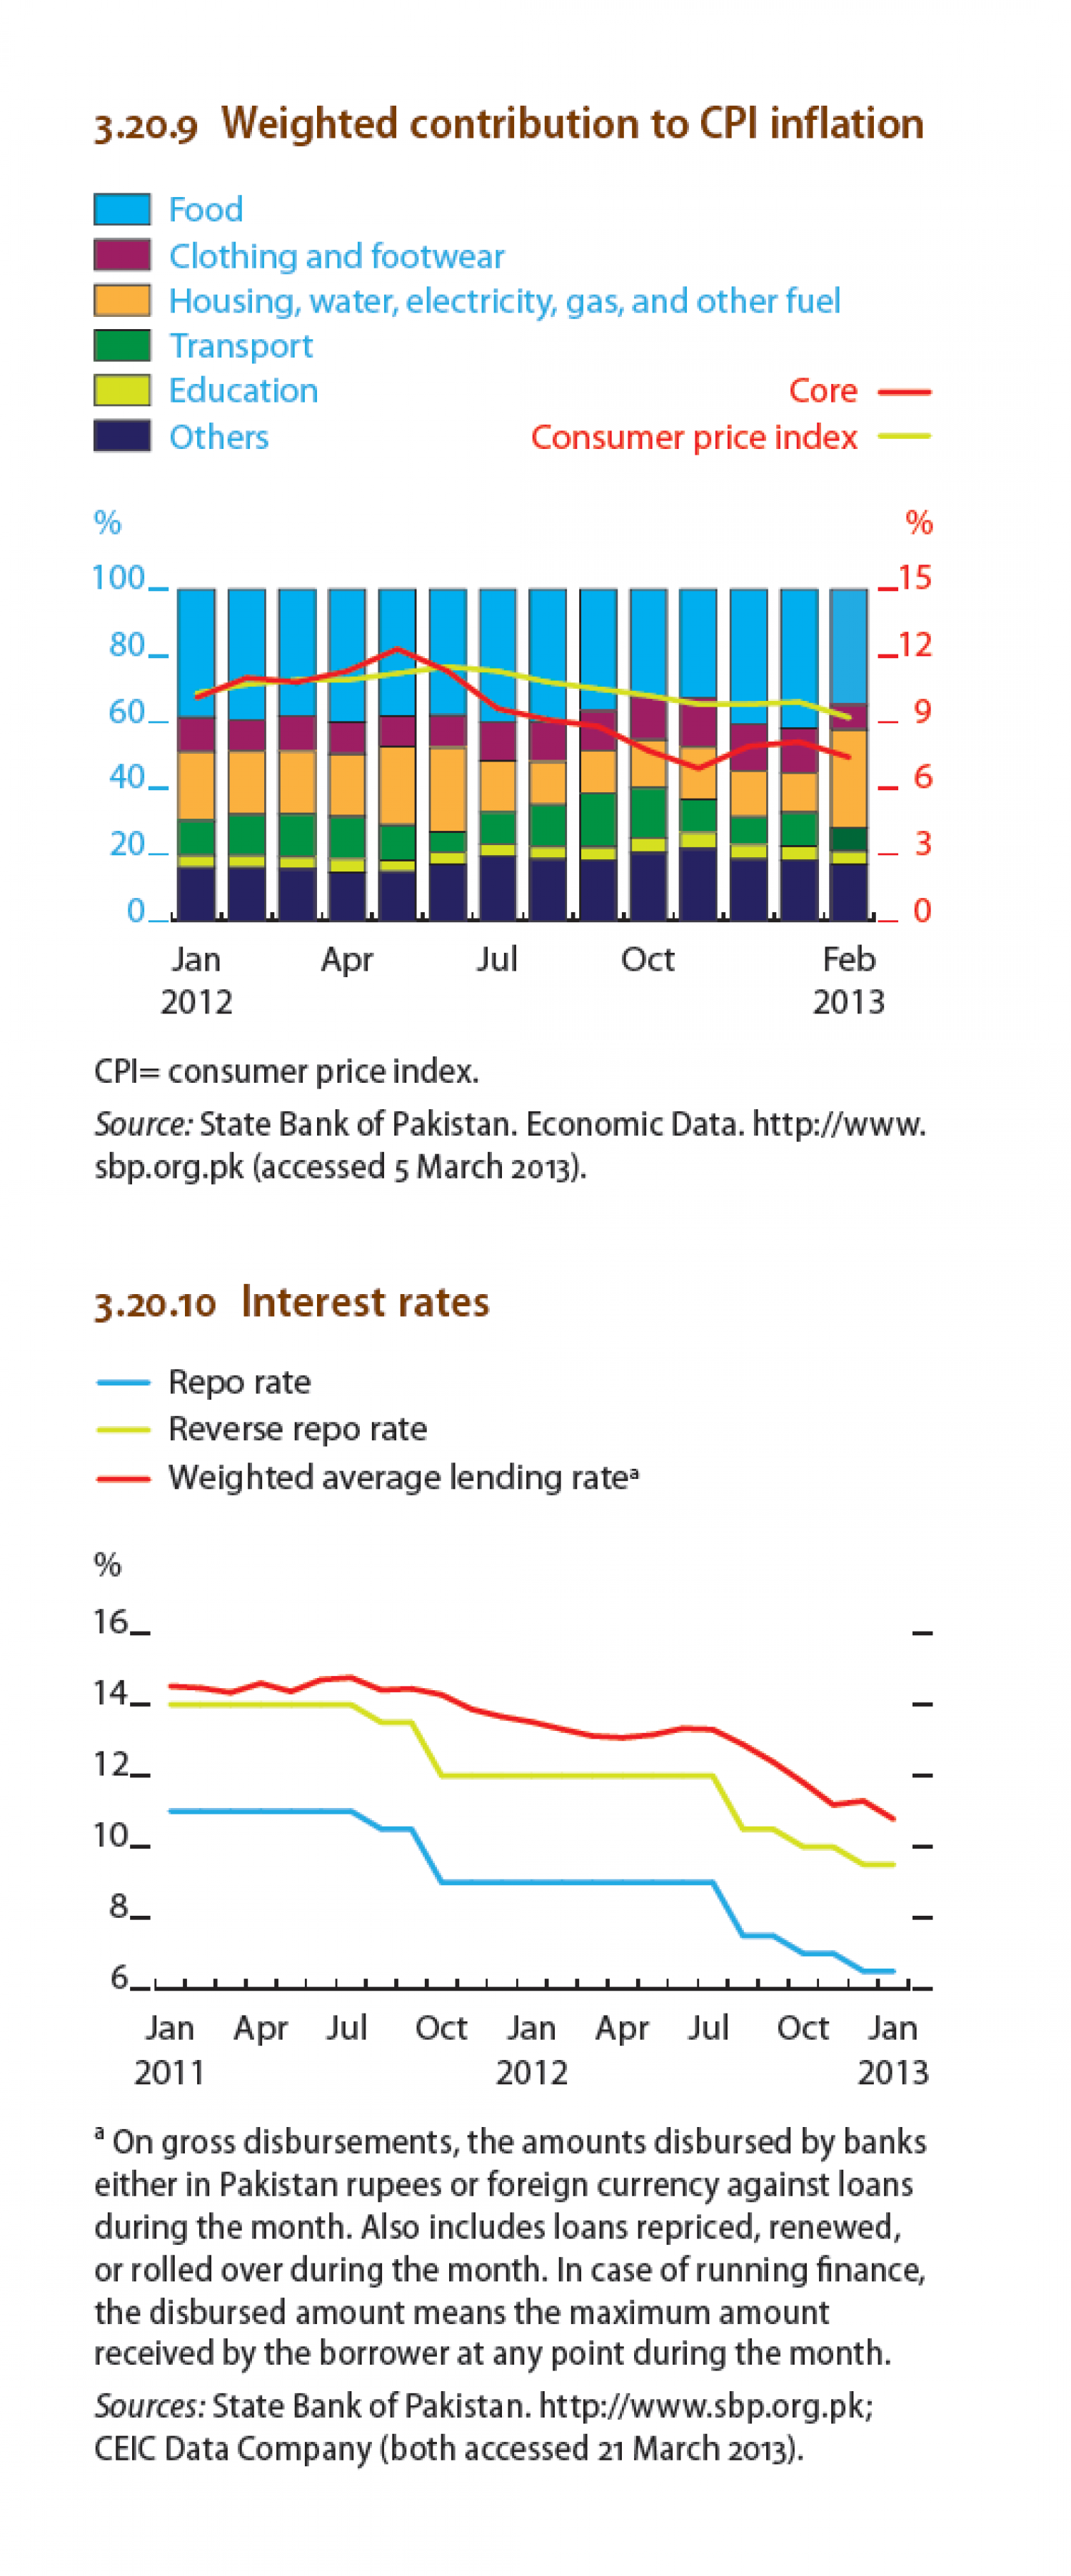 Pakistan - Weighted contribution to CPI imflation,  Interest rates Infographic